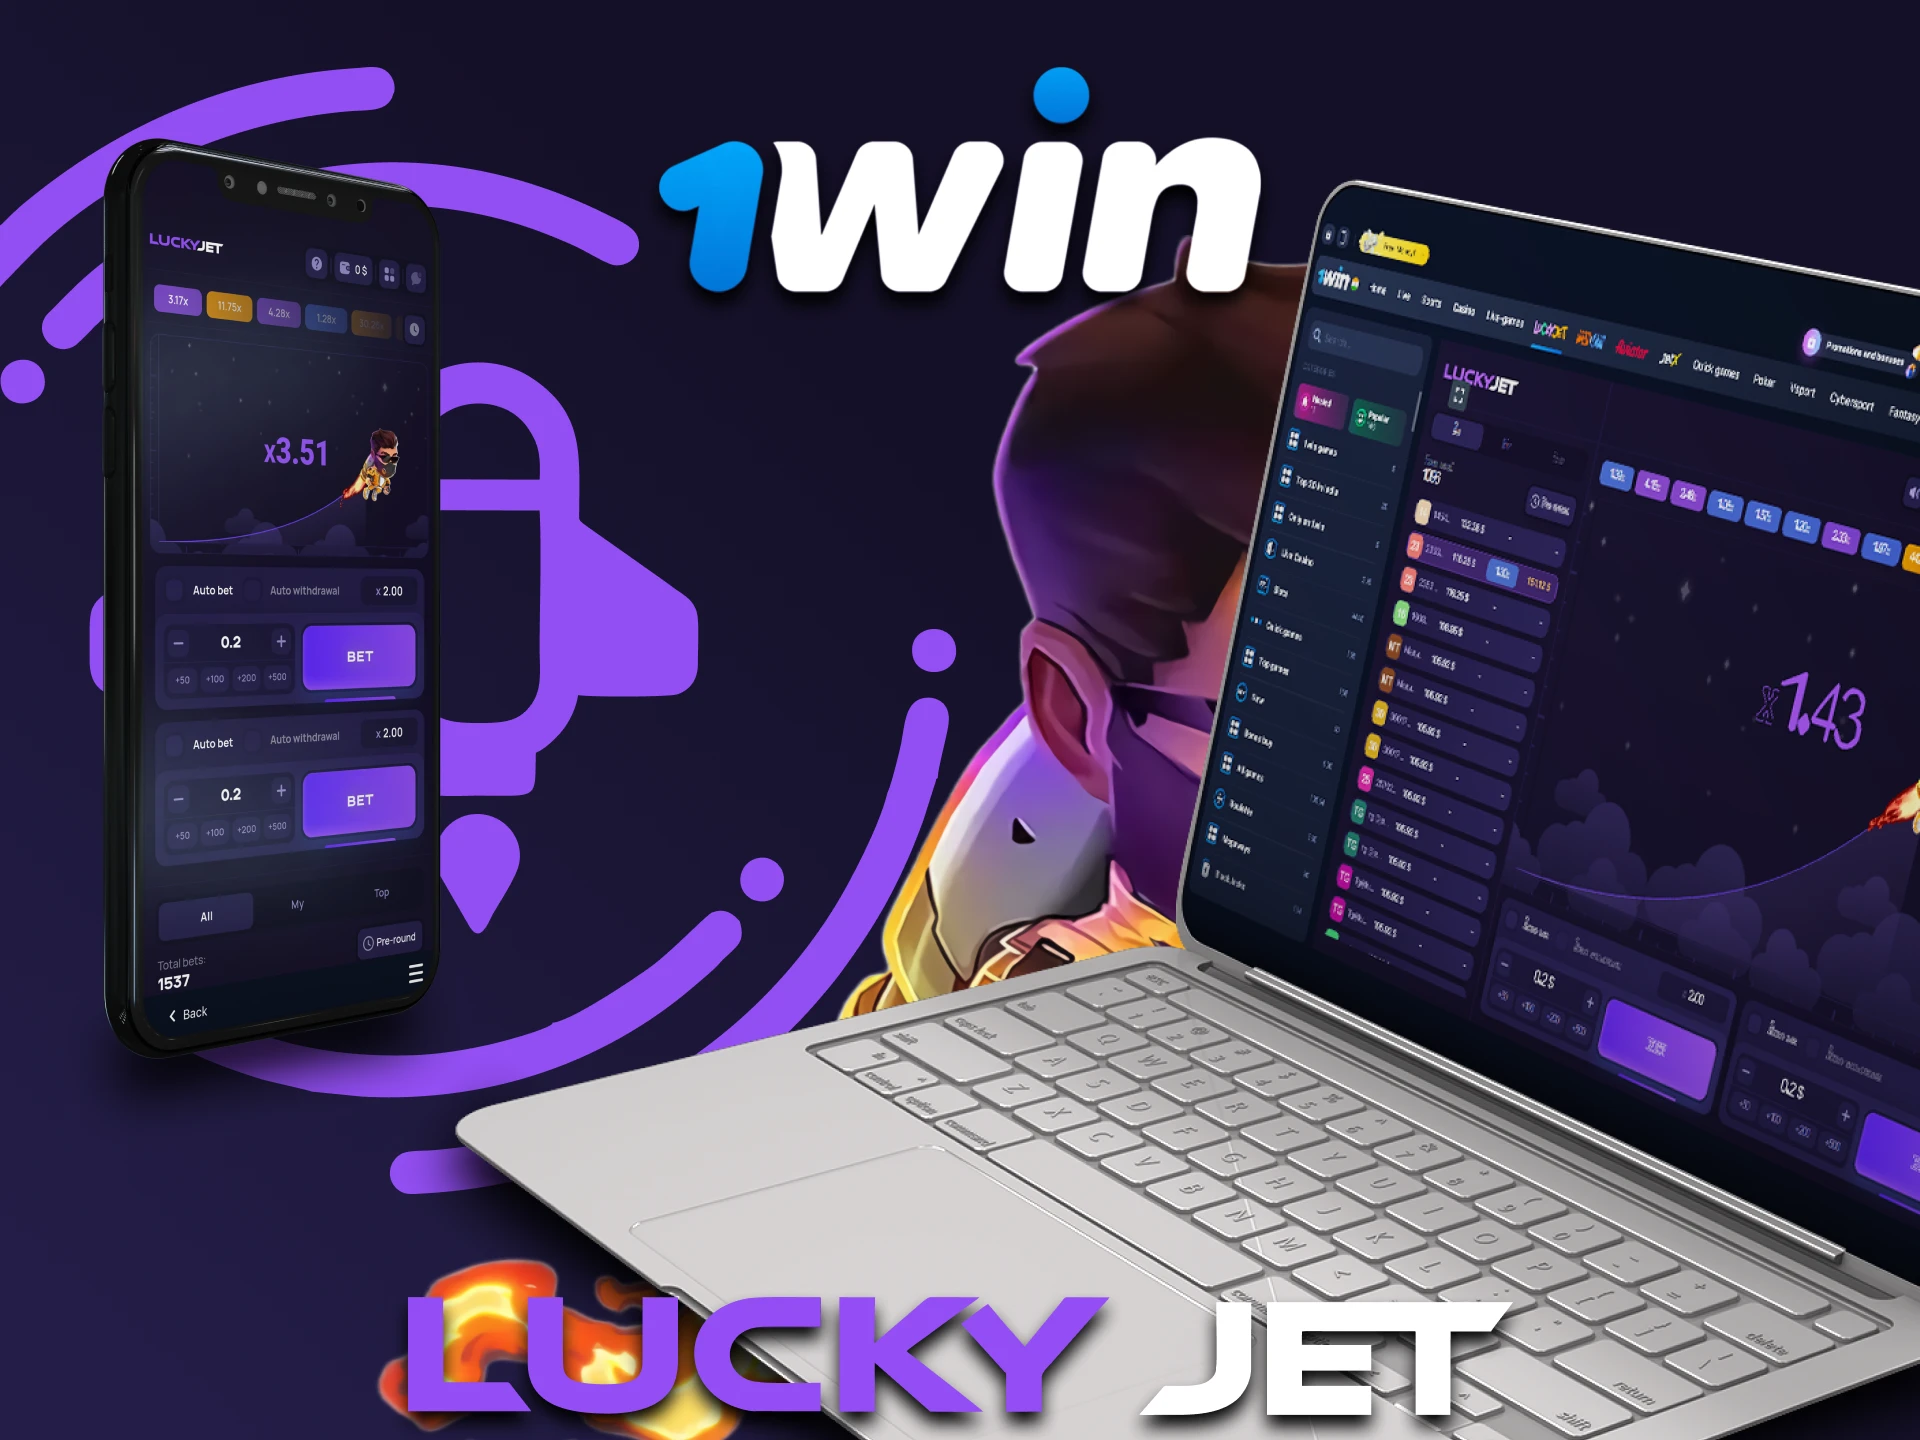 Play via mobile app or web version of Lucky Jet by 1win, the choice is yours.